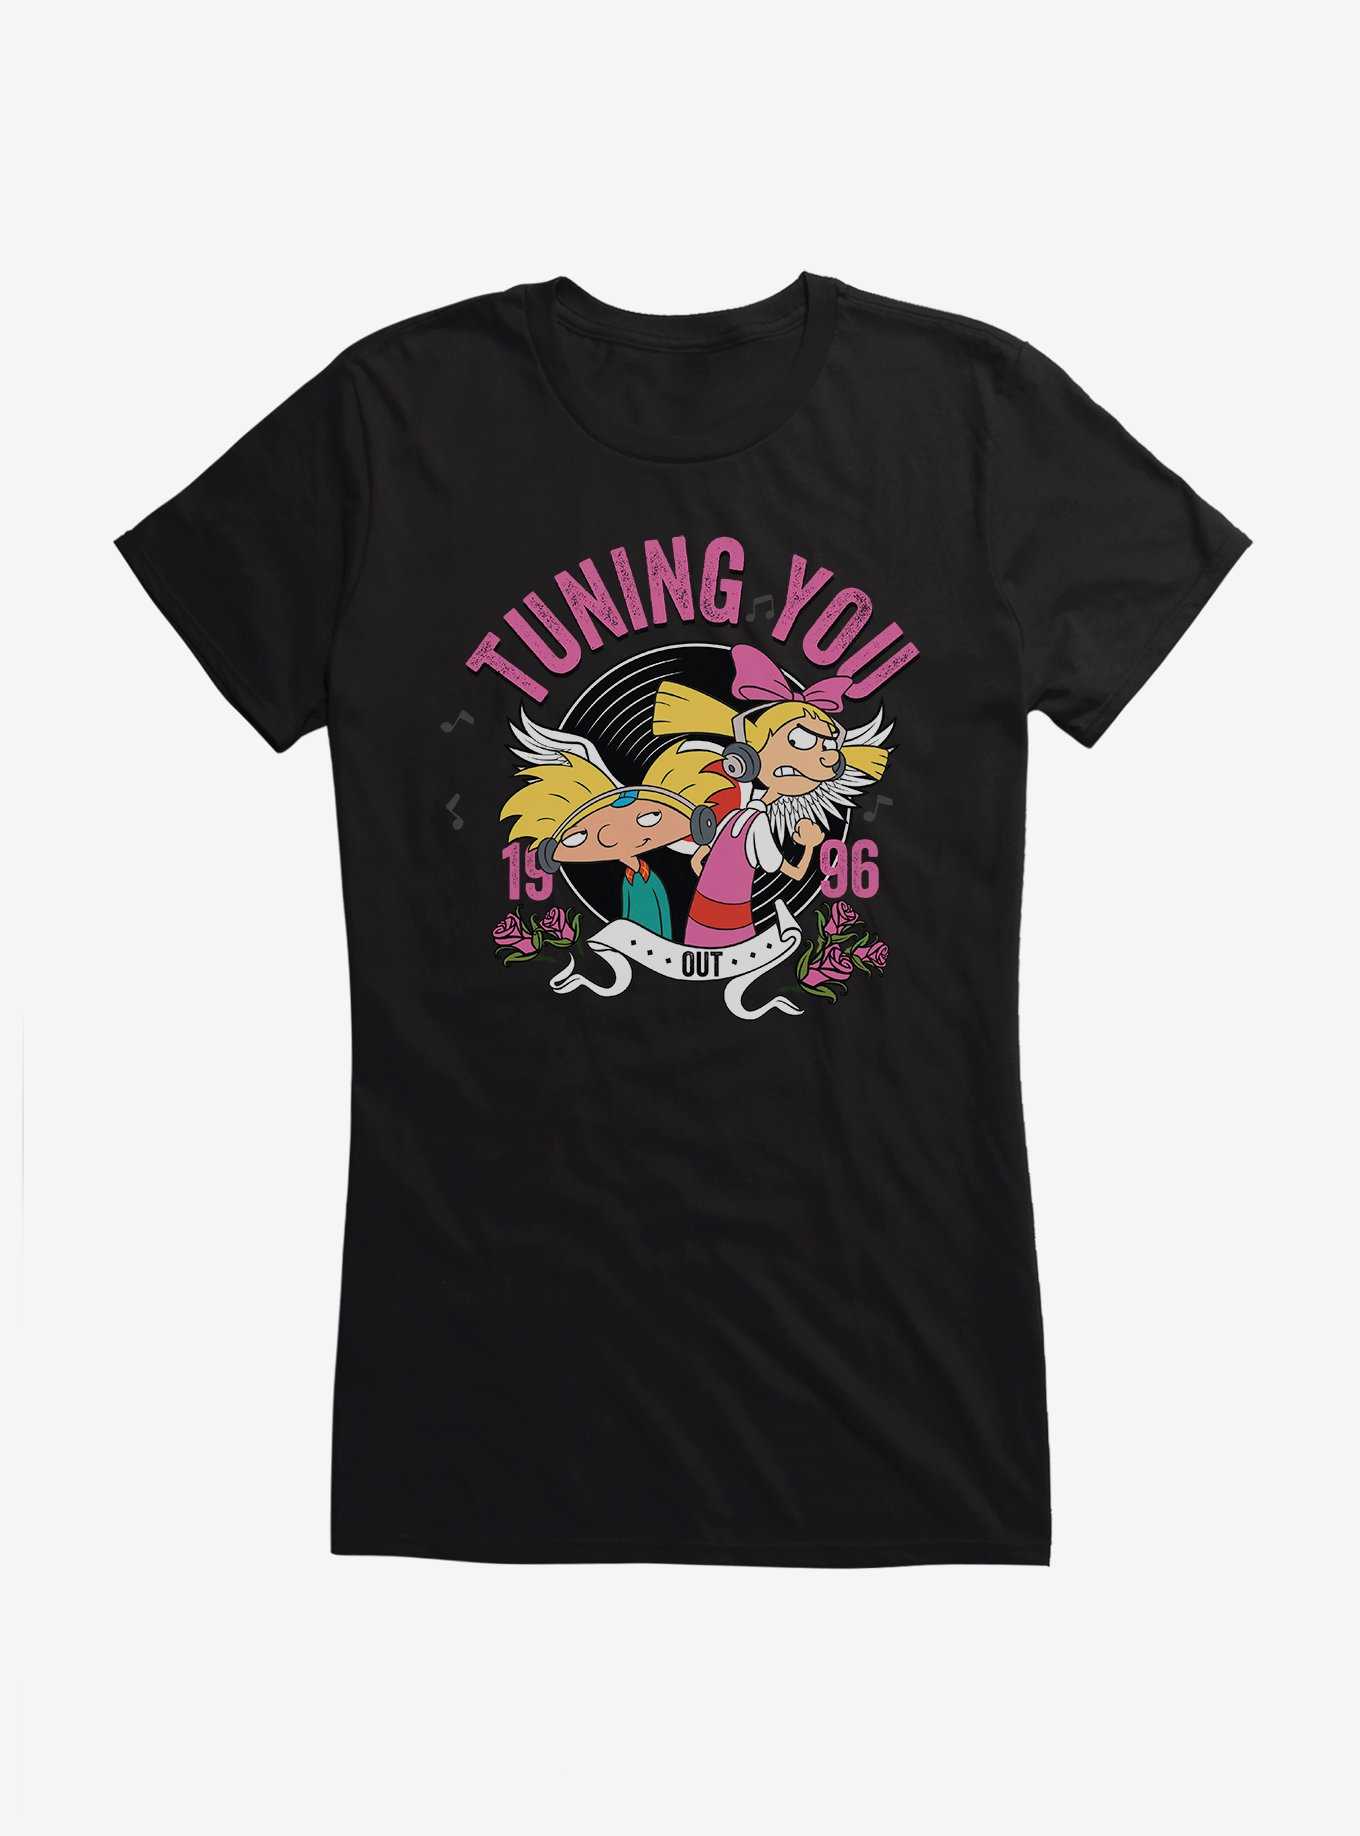 Hey Arnold! Tuning You Out 1996 Girls T-Shirt, , hi-res